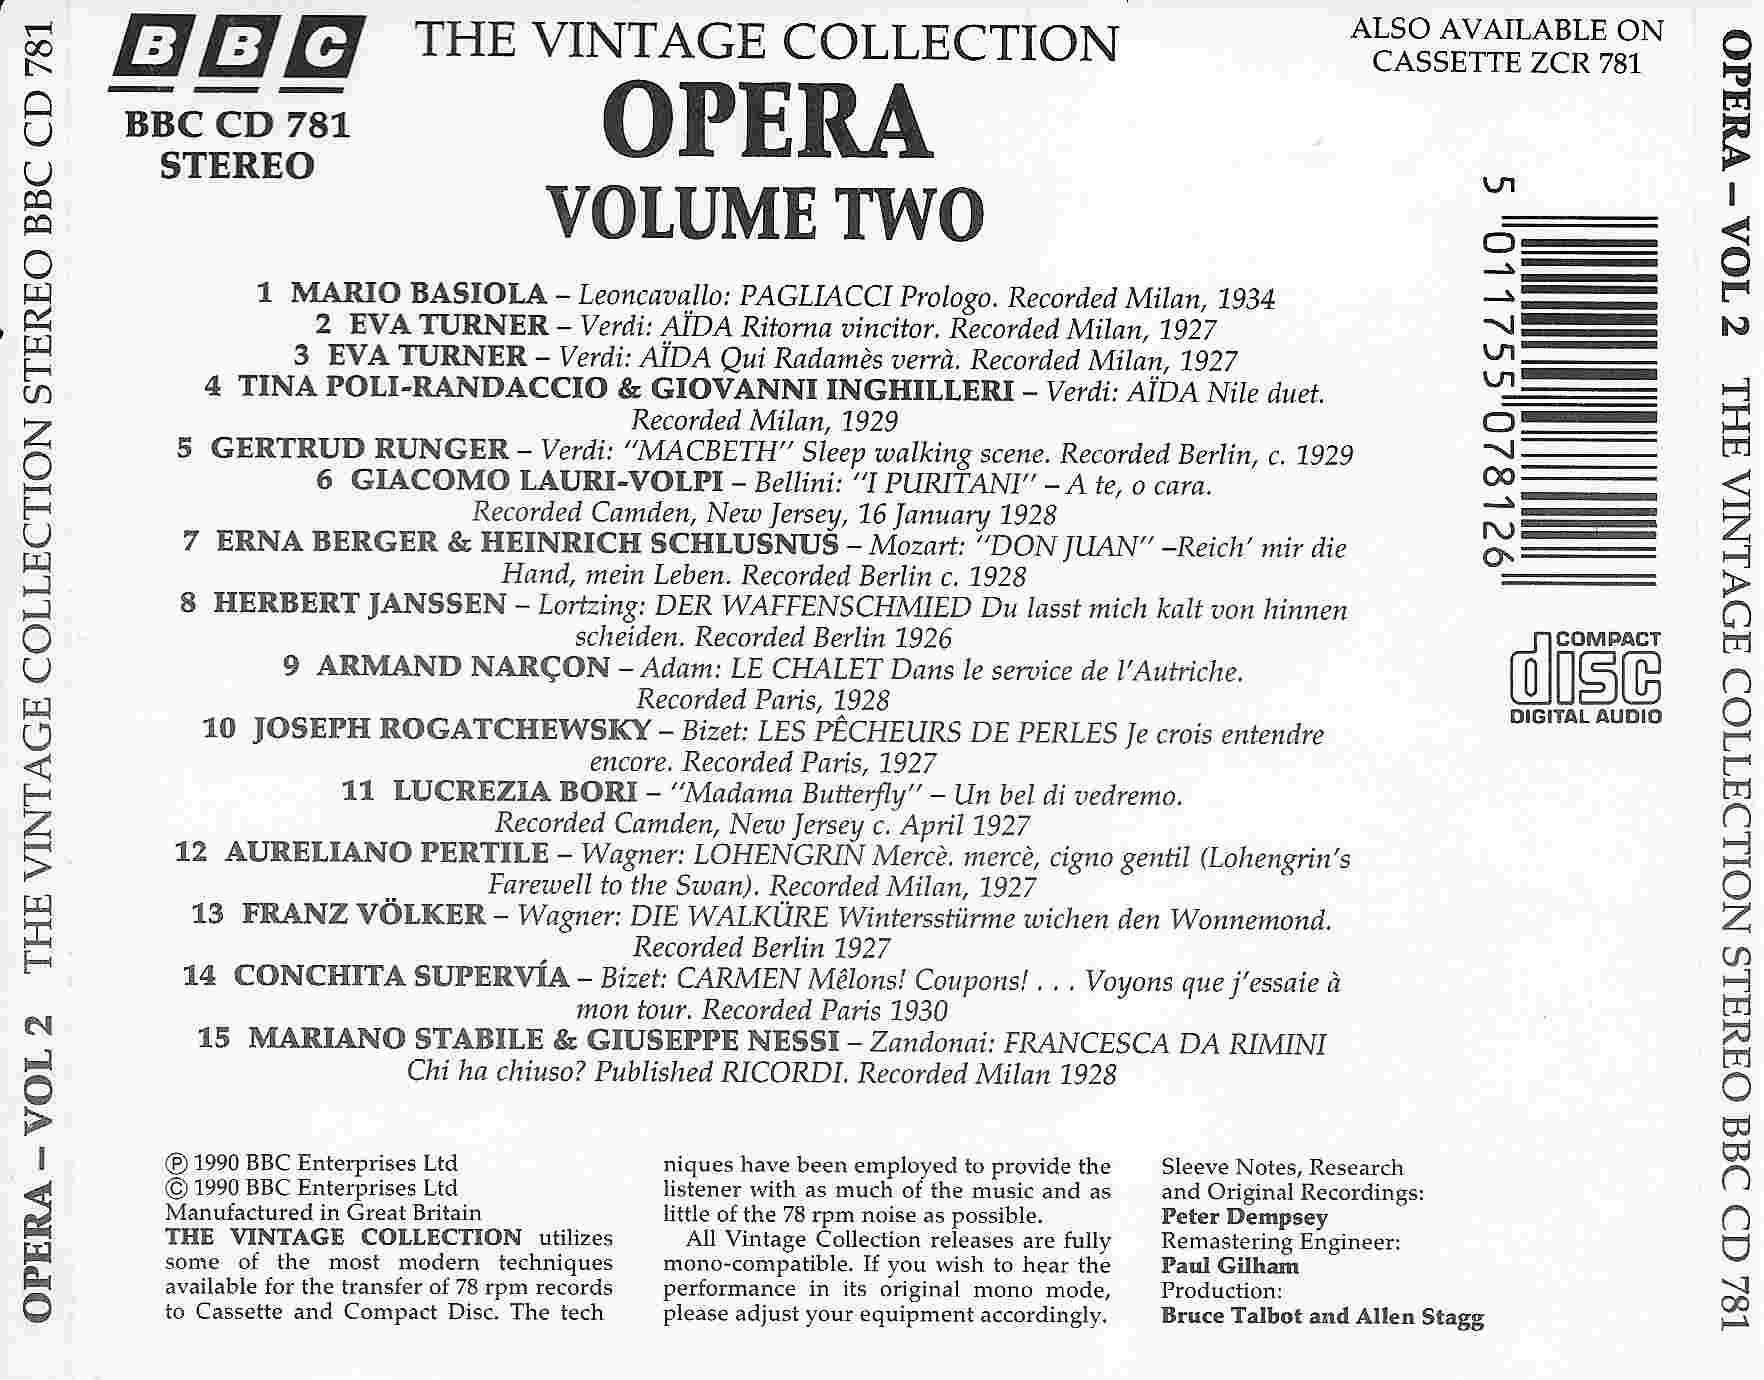 Picture of BBCCD781 The vintage collection - Opera II by artist Various from the BBC records and Tapes library